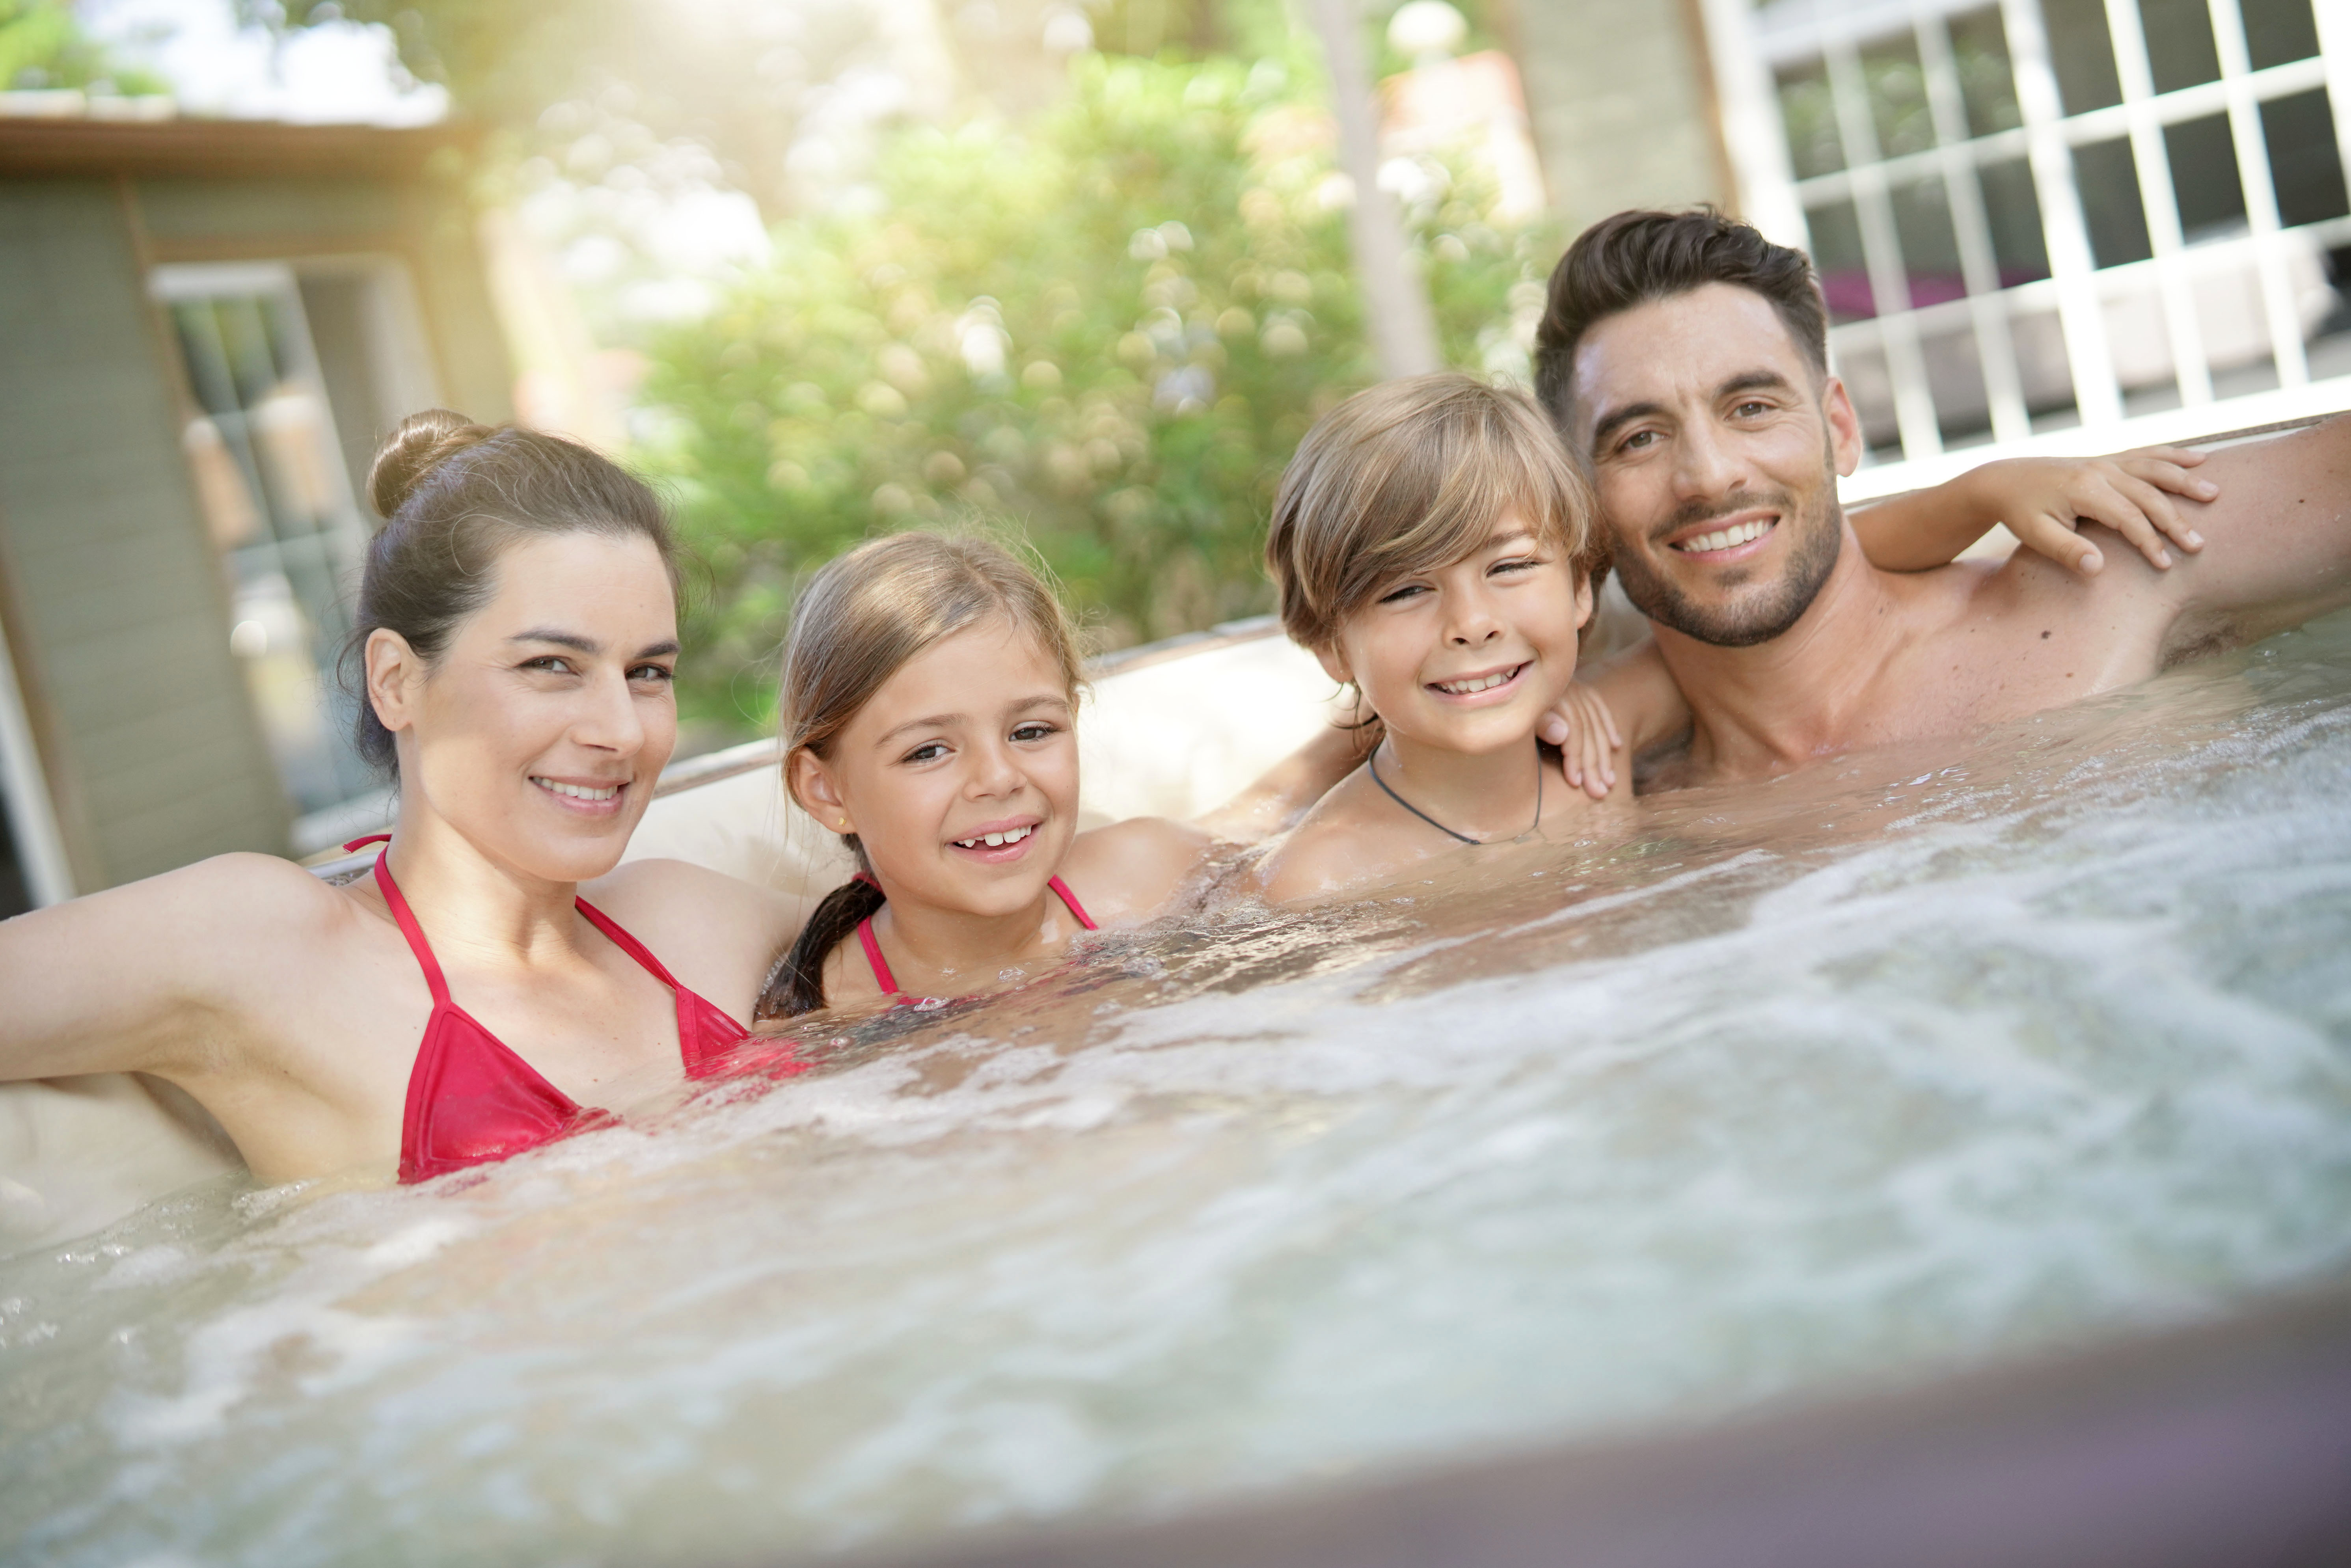 children with family on spa visit in jacuzzi